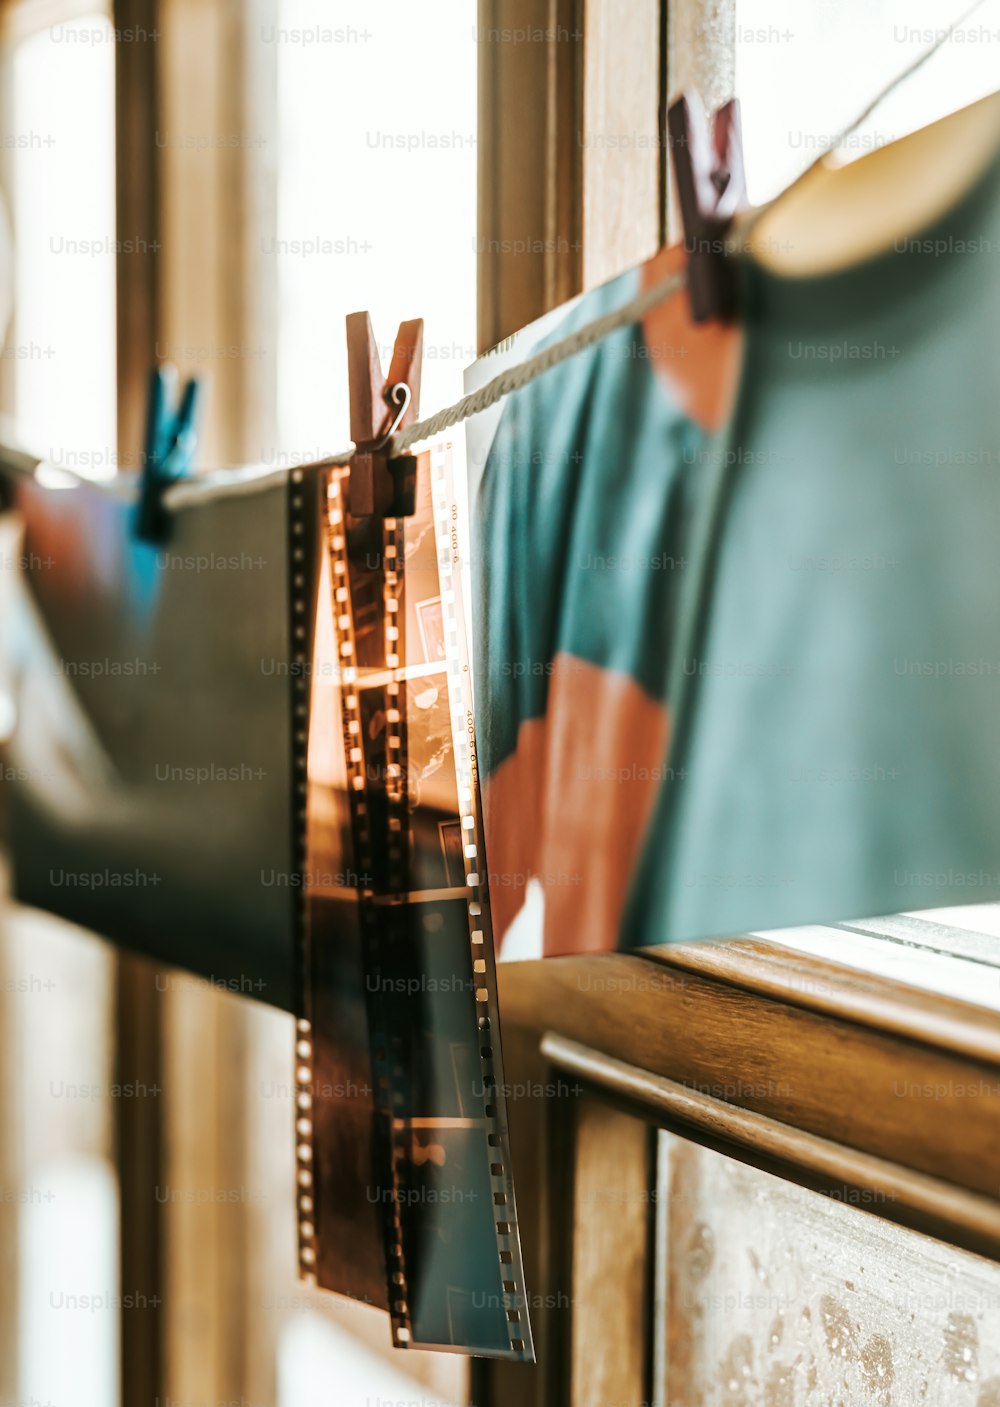 a film strip hanging on a clothes line